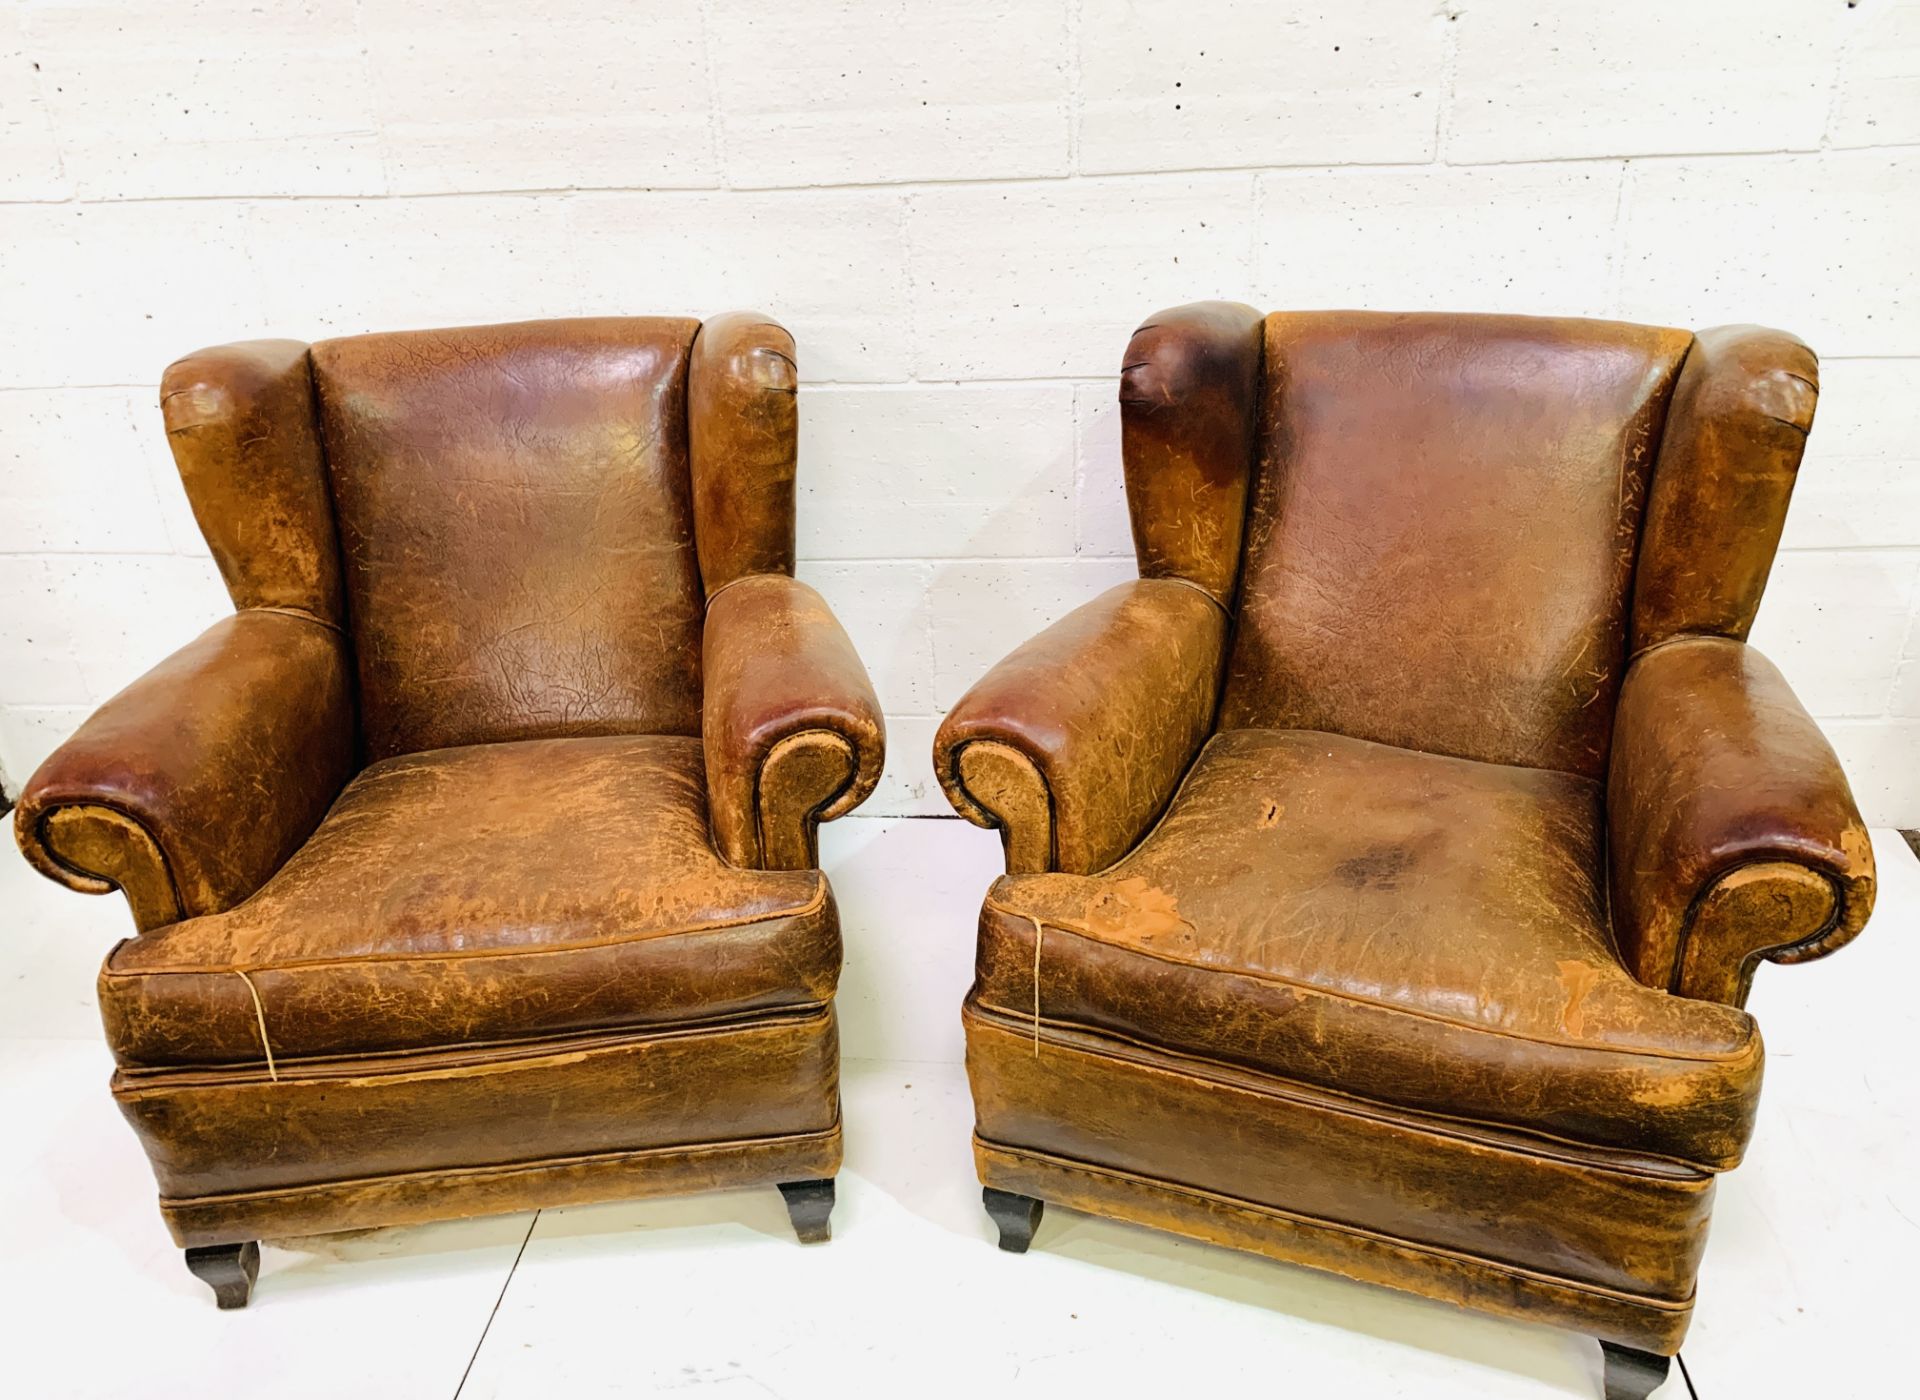 A pair of French brown leather wing back armchairs